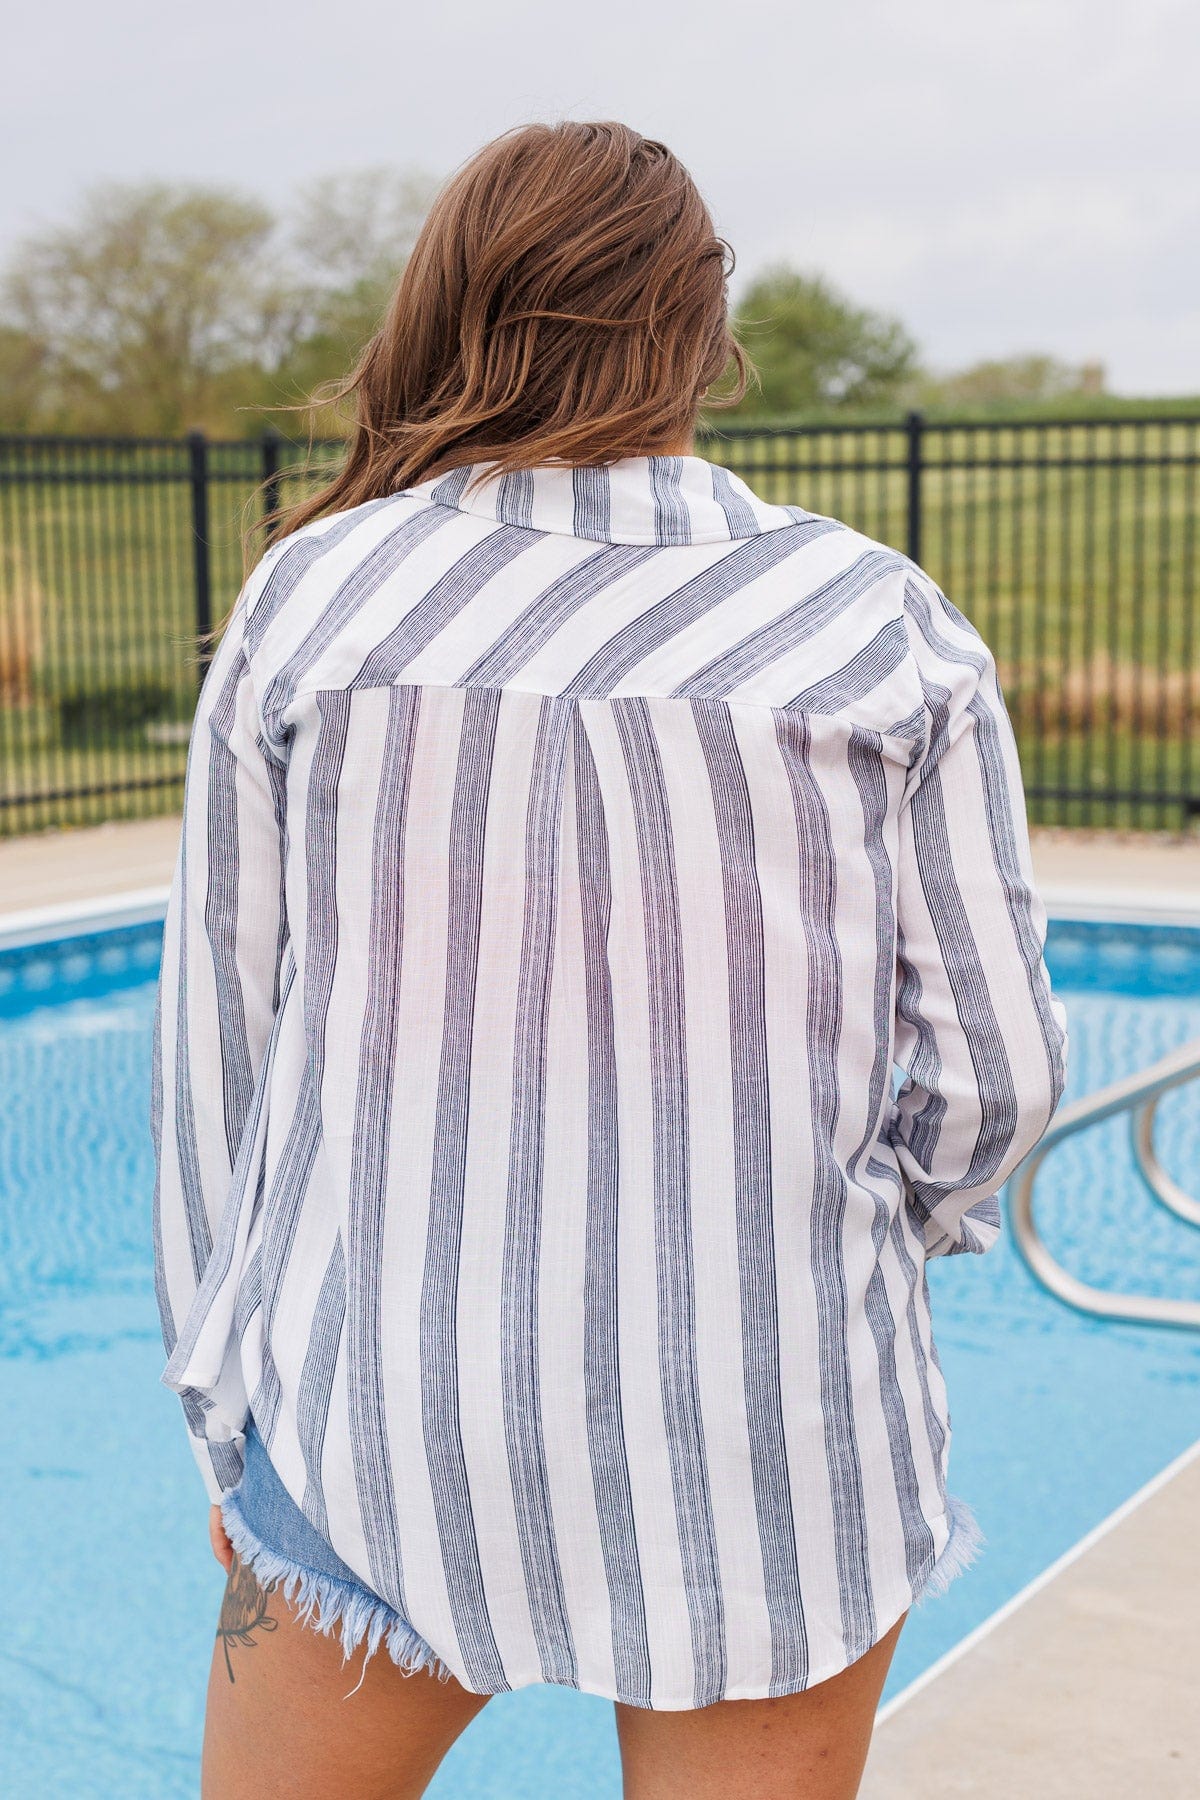 Full Of Pride Striped Button Up Top- Navy